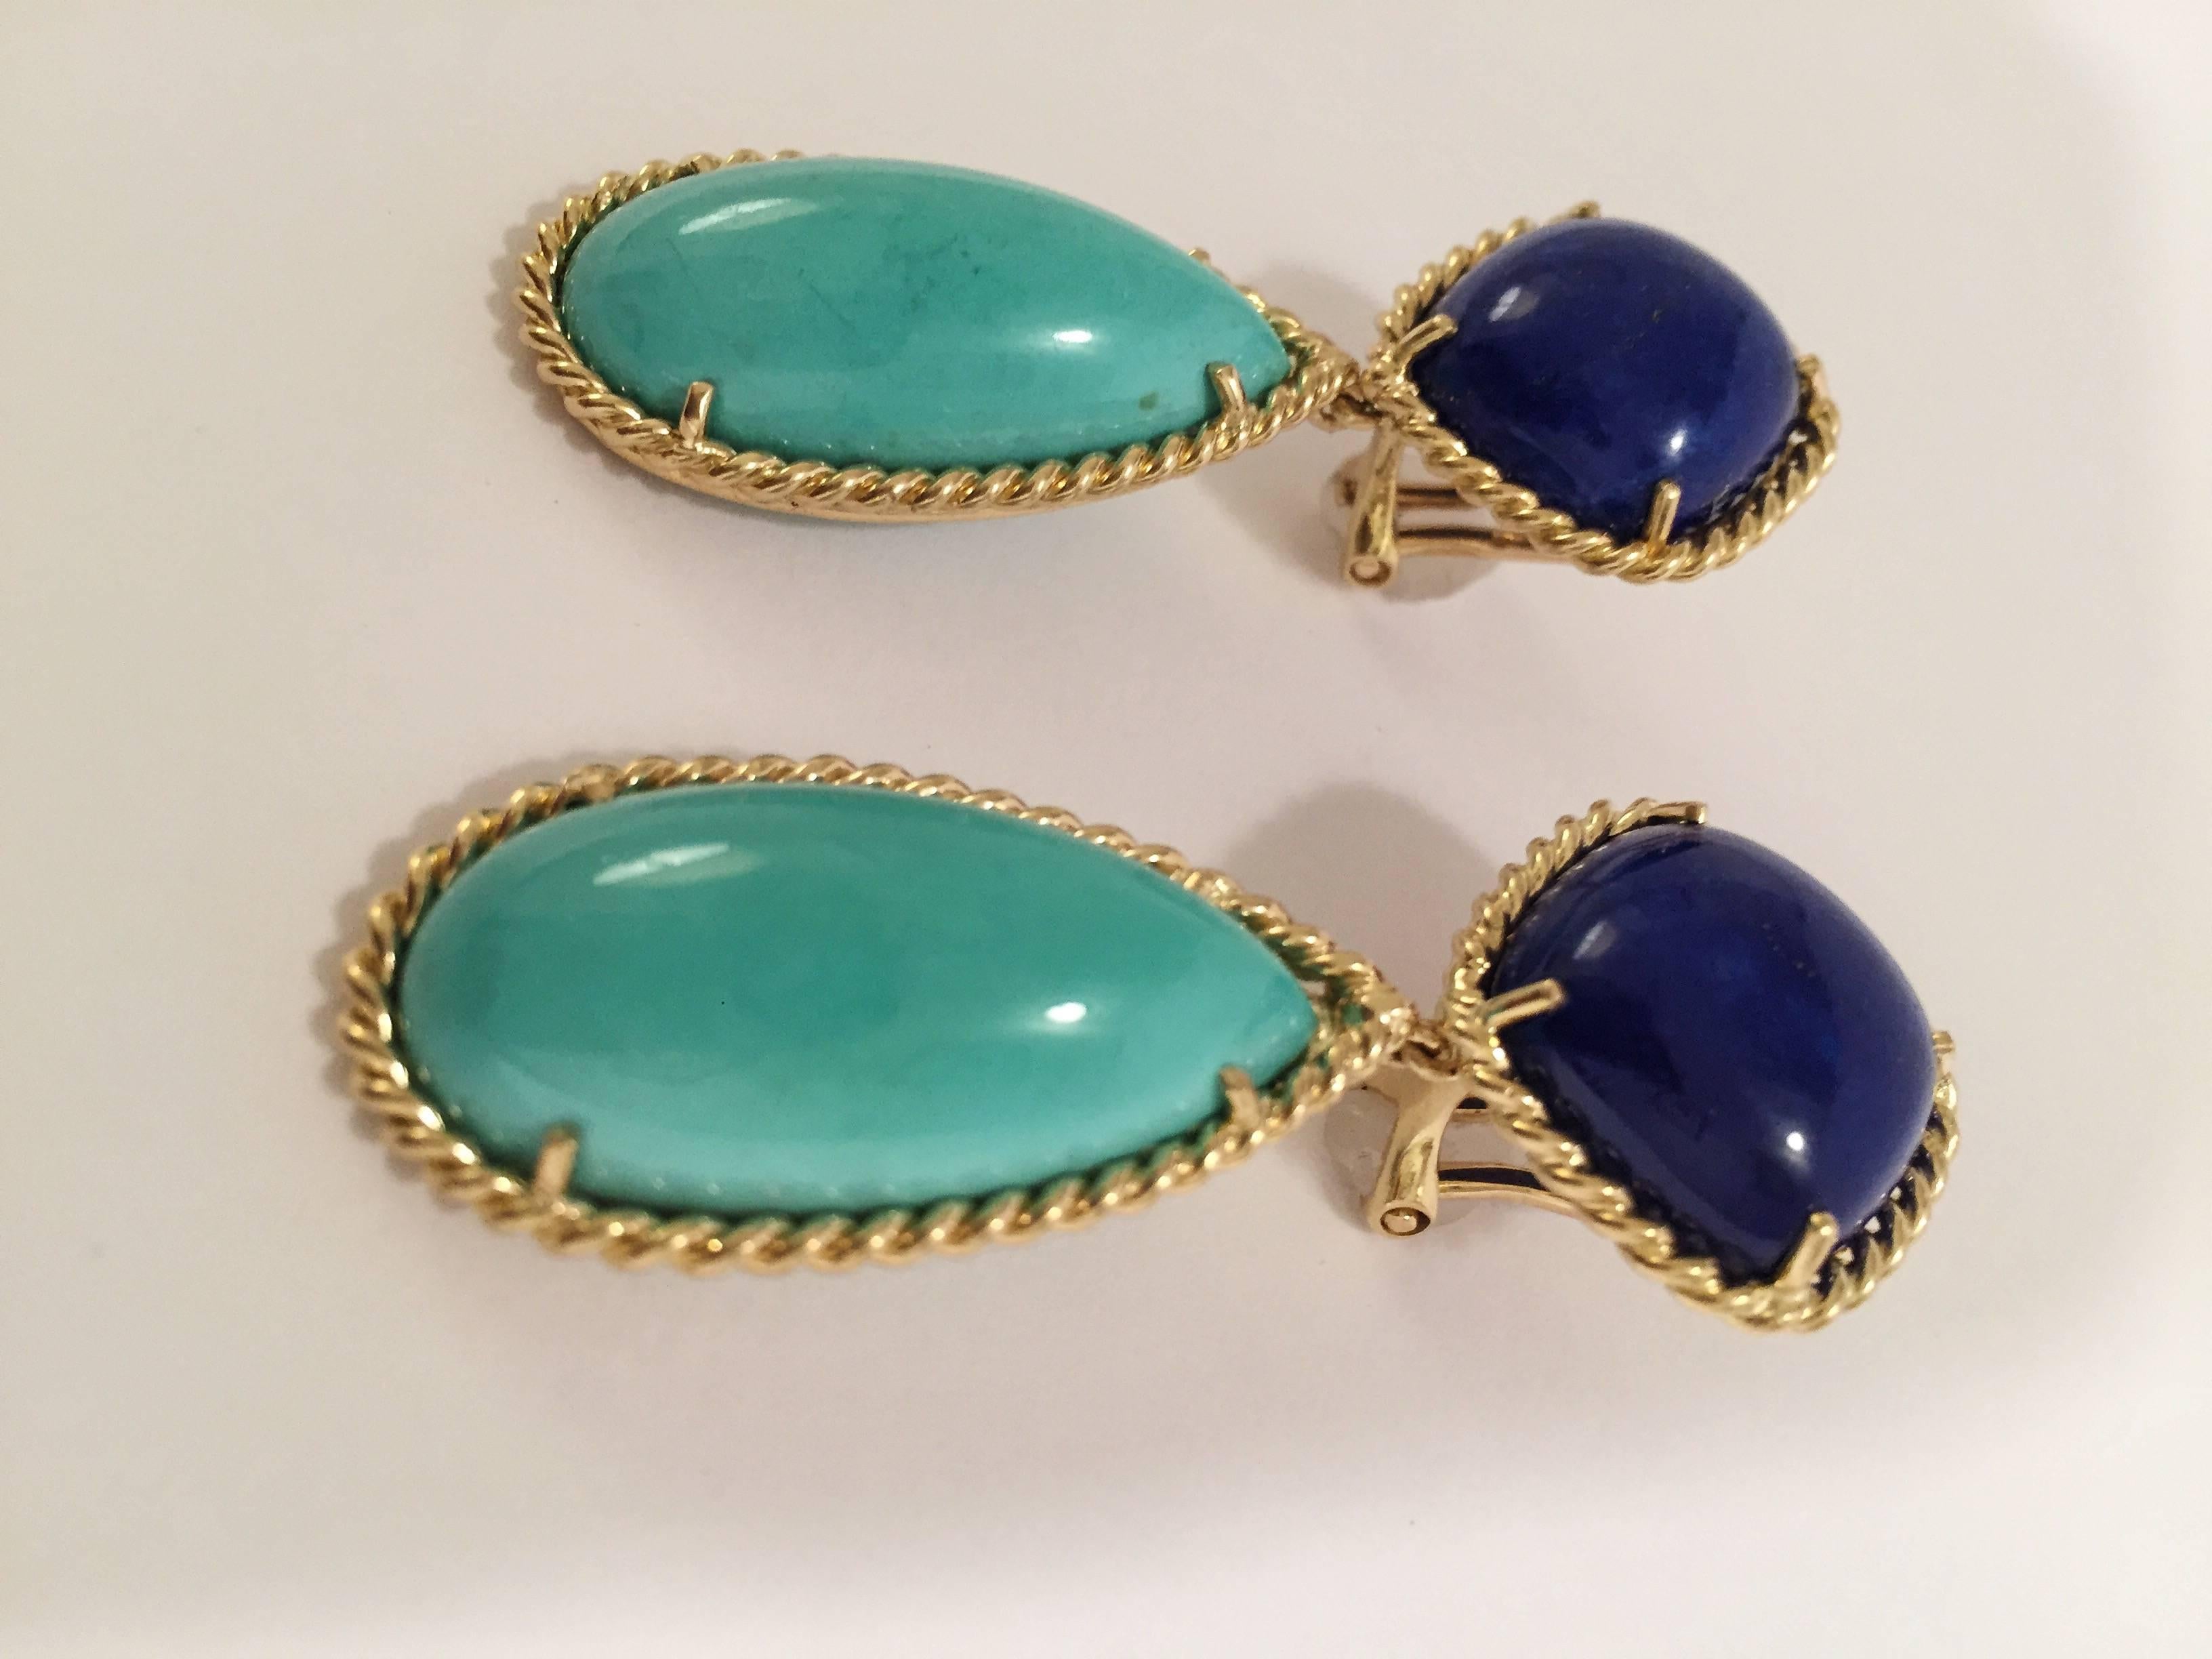 Elegant Rope Twist edged drop Earrings with Lapis and Turquoise.  The Cushion shaped Cabochon Lapis is 3/4